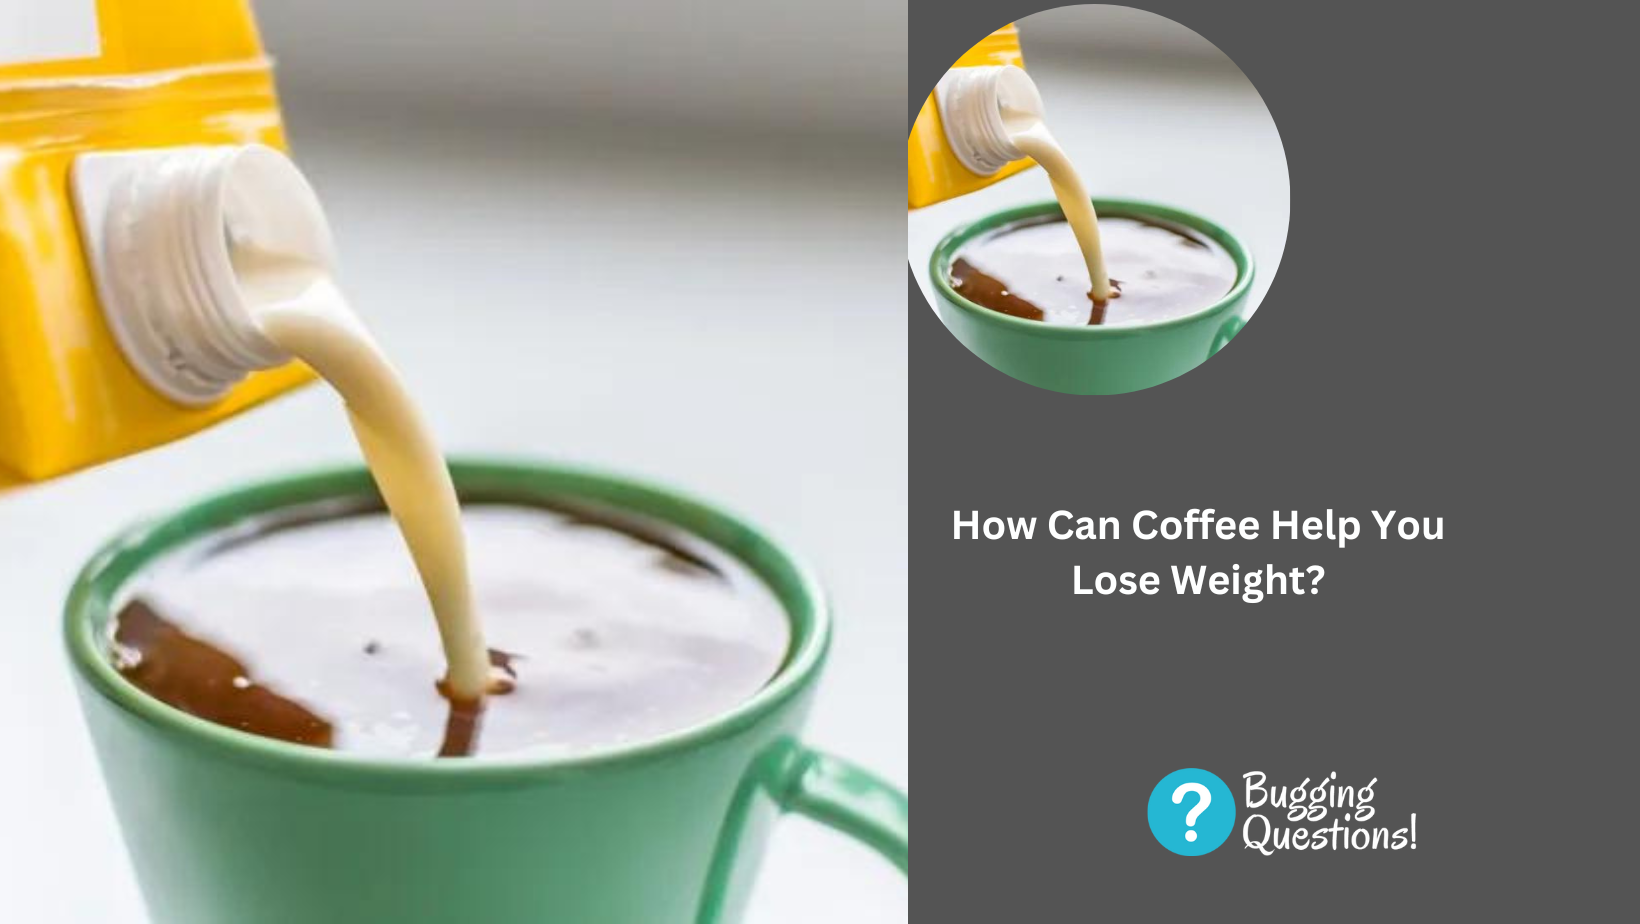 How Can Coffee Help You Lose Weight? Here Is What To Know